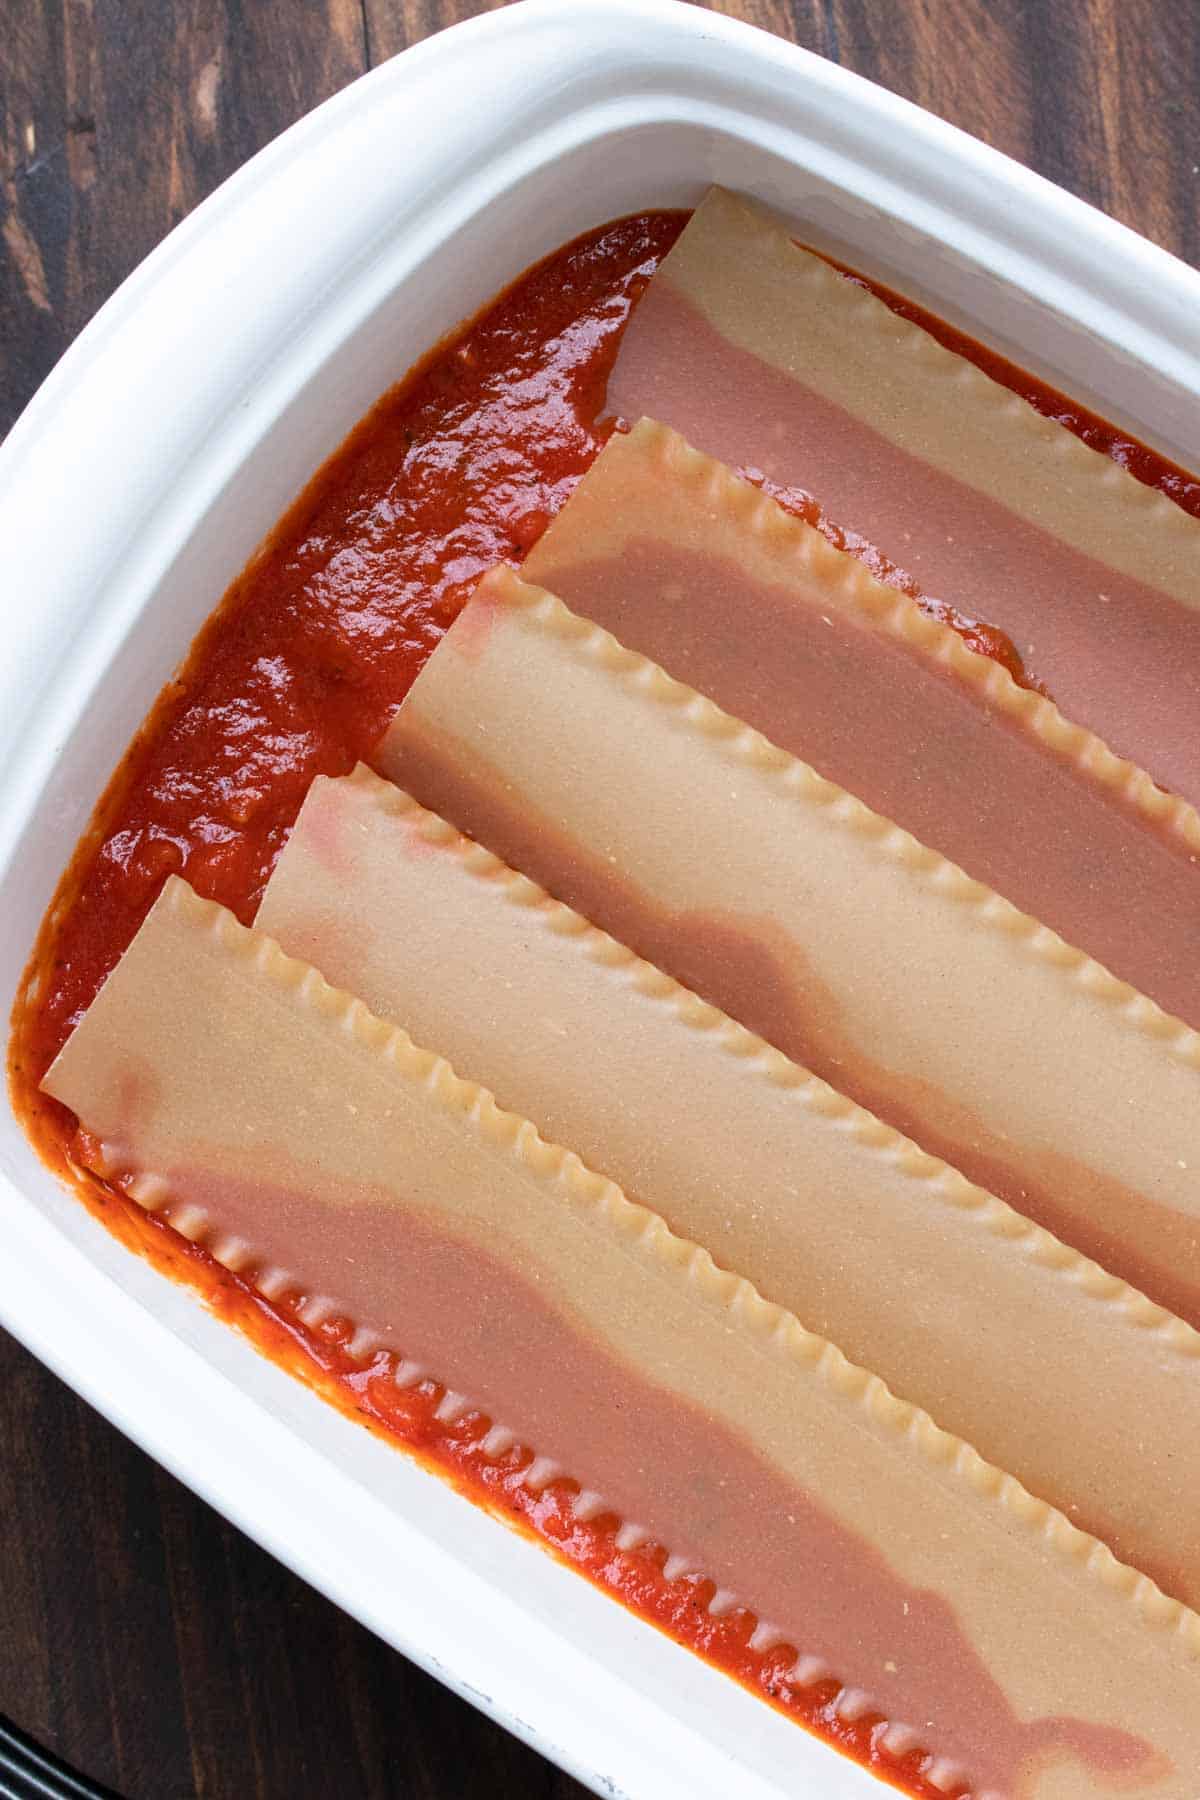 Top view of raw lasagna noodles in red sauce in a white baking dish.